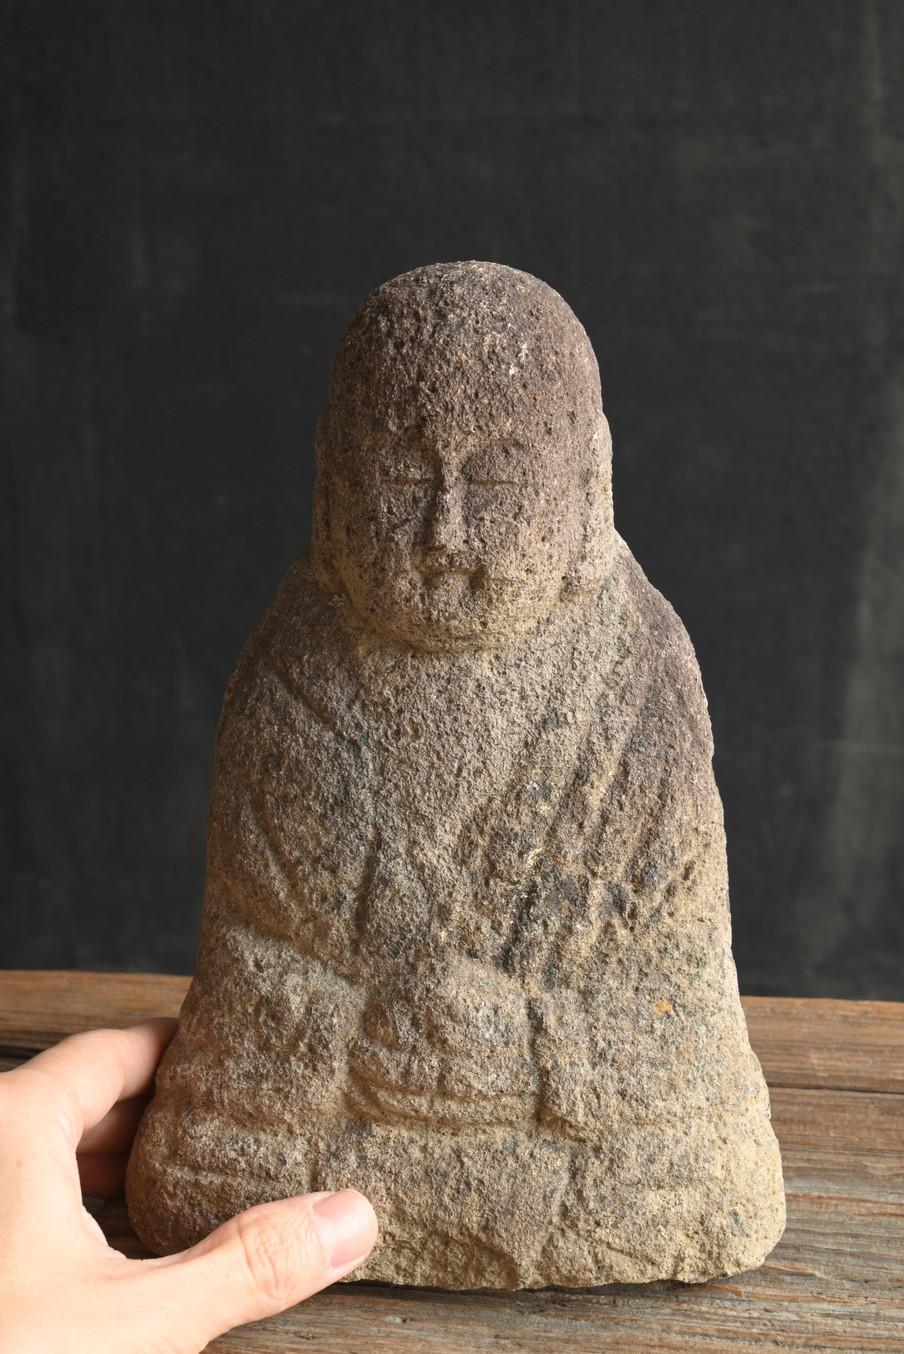 We would like to introduce you to some attractive stone Buddha statues.
This is a very simple stone Buddha carved in the late Edo period (1750-1868).
It is thought that this was probably made on Sado Island in Niigata Prefecture. (Sado Island is